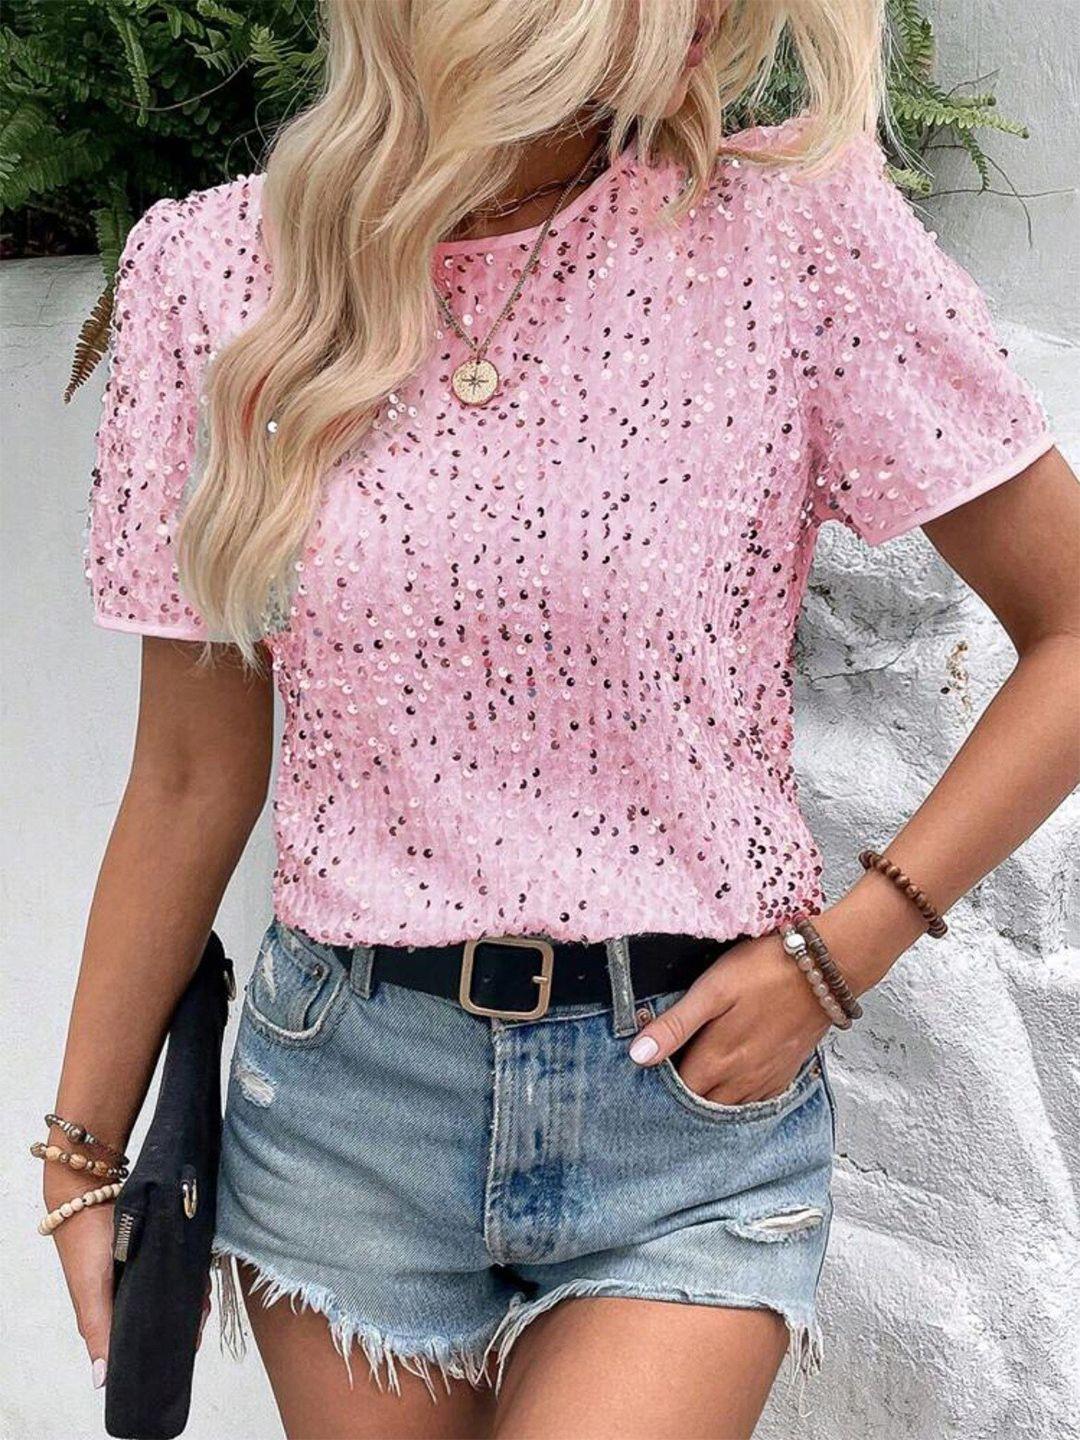 stylecast-pink-embellished-puff-sleeves-top